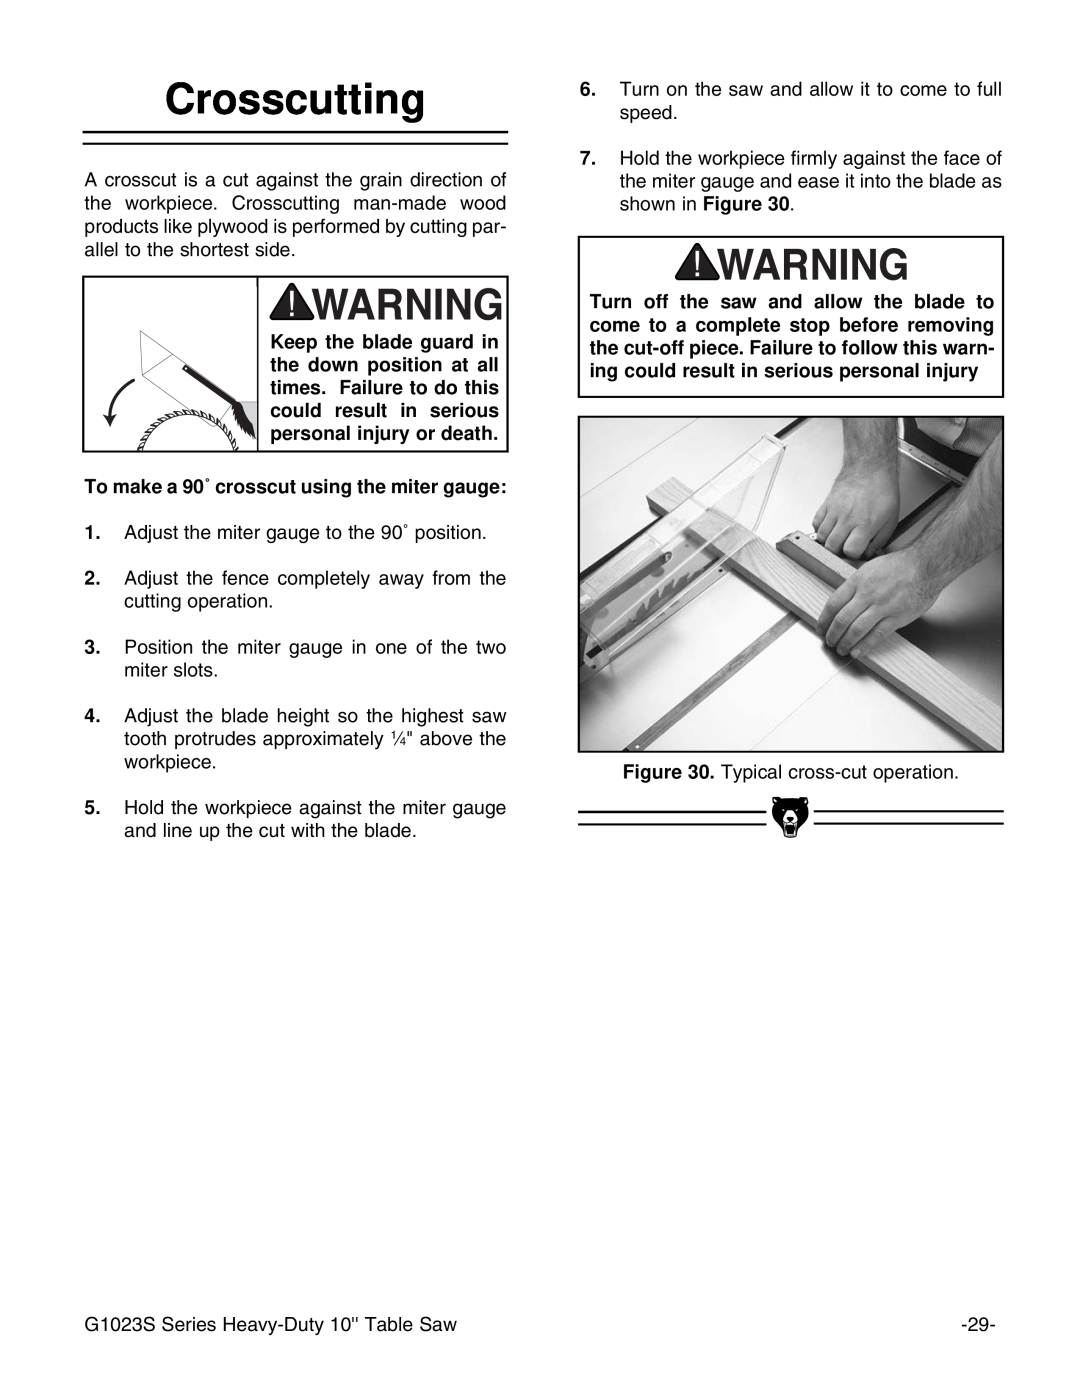 Grizzly MODEL instruction manual Crosscutting 